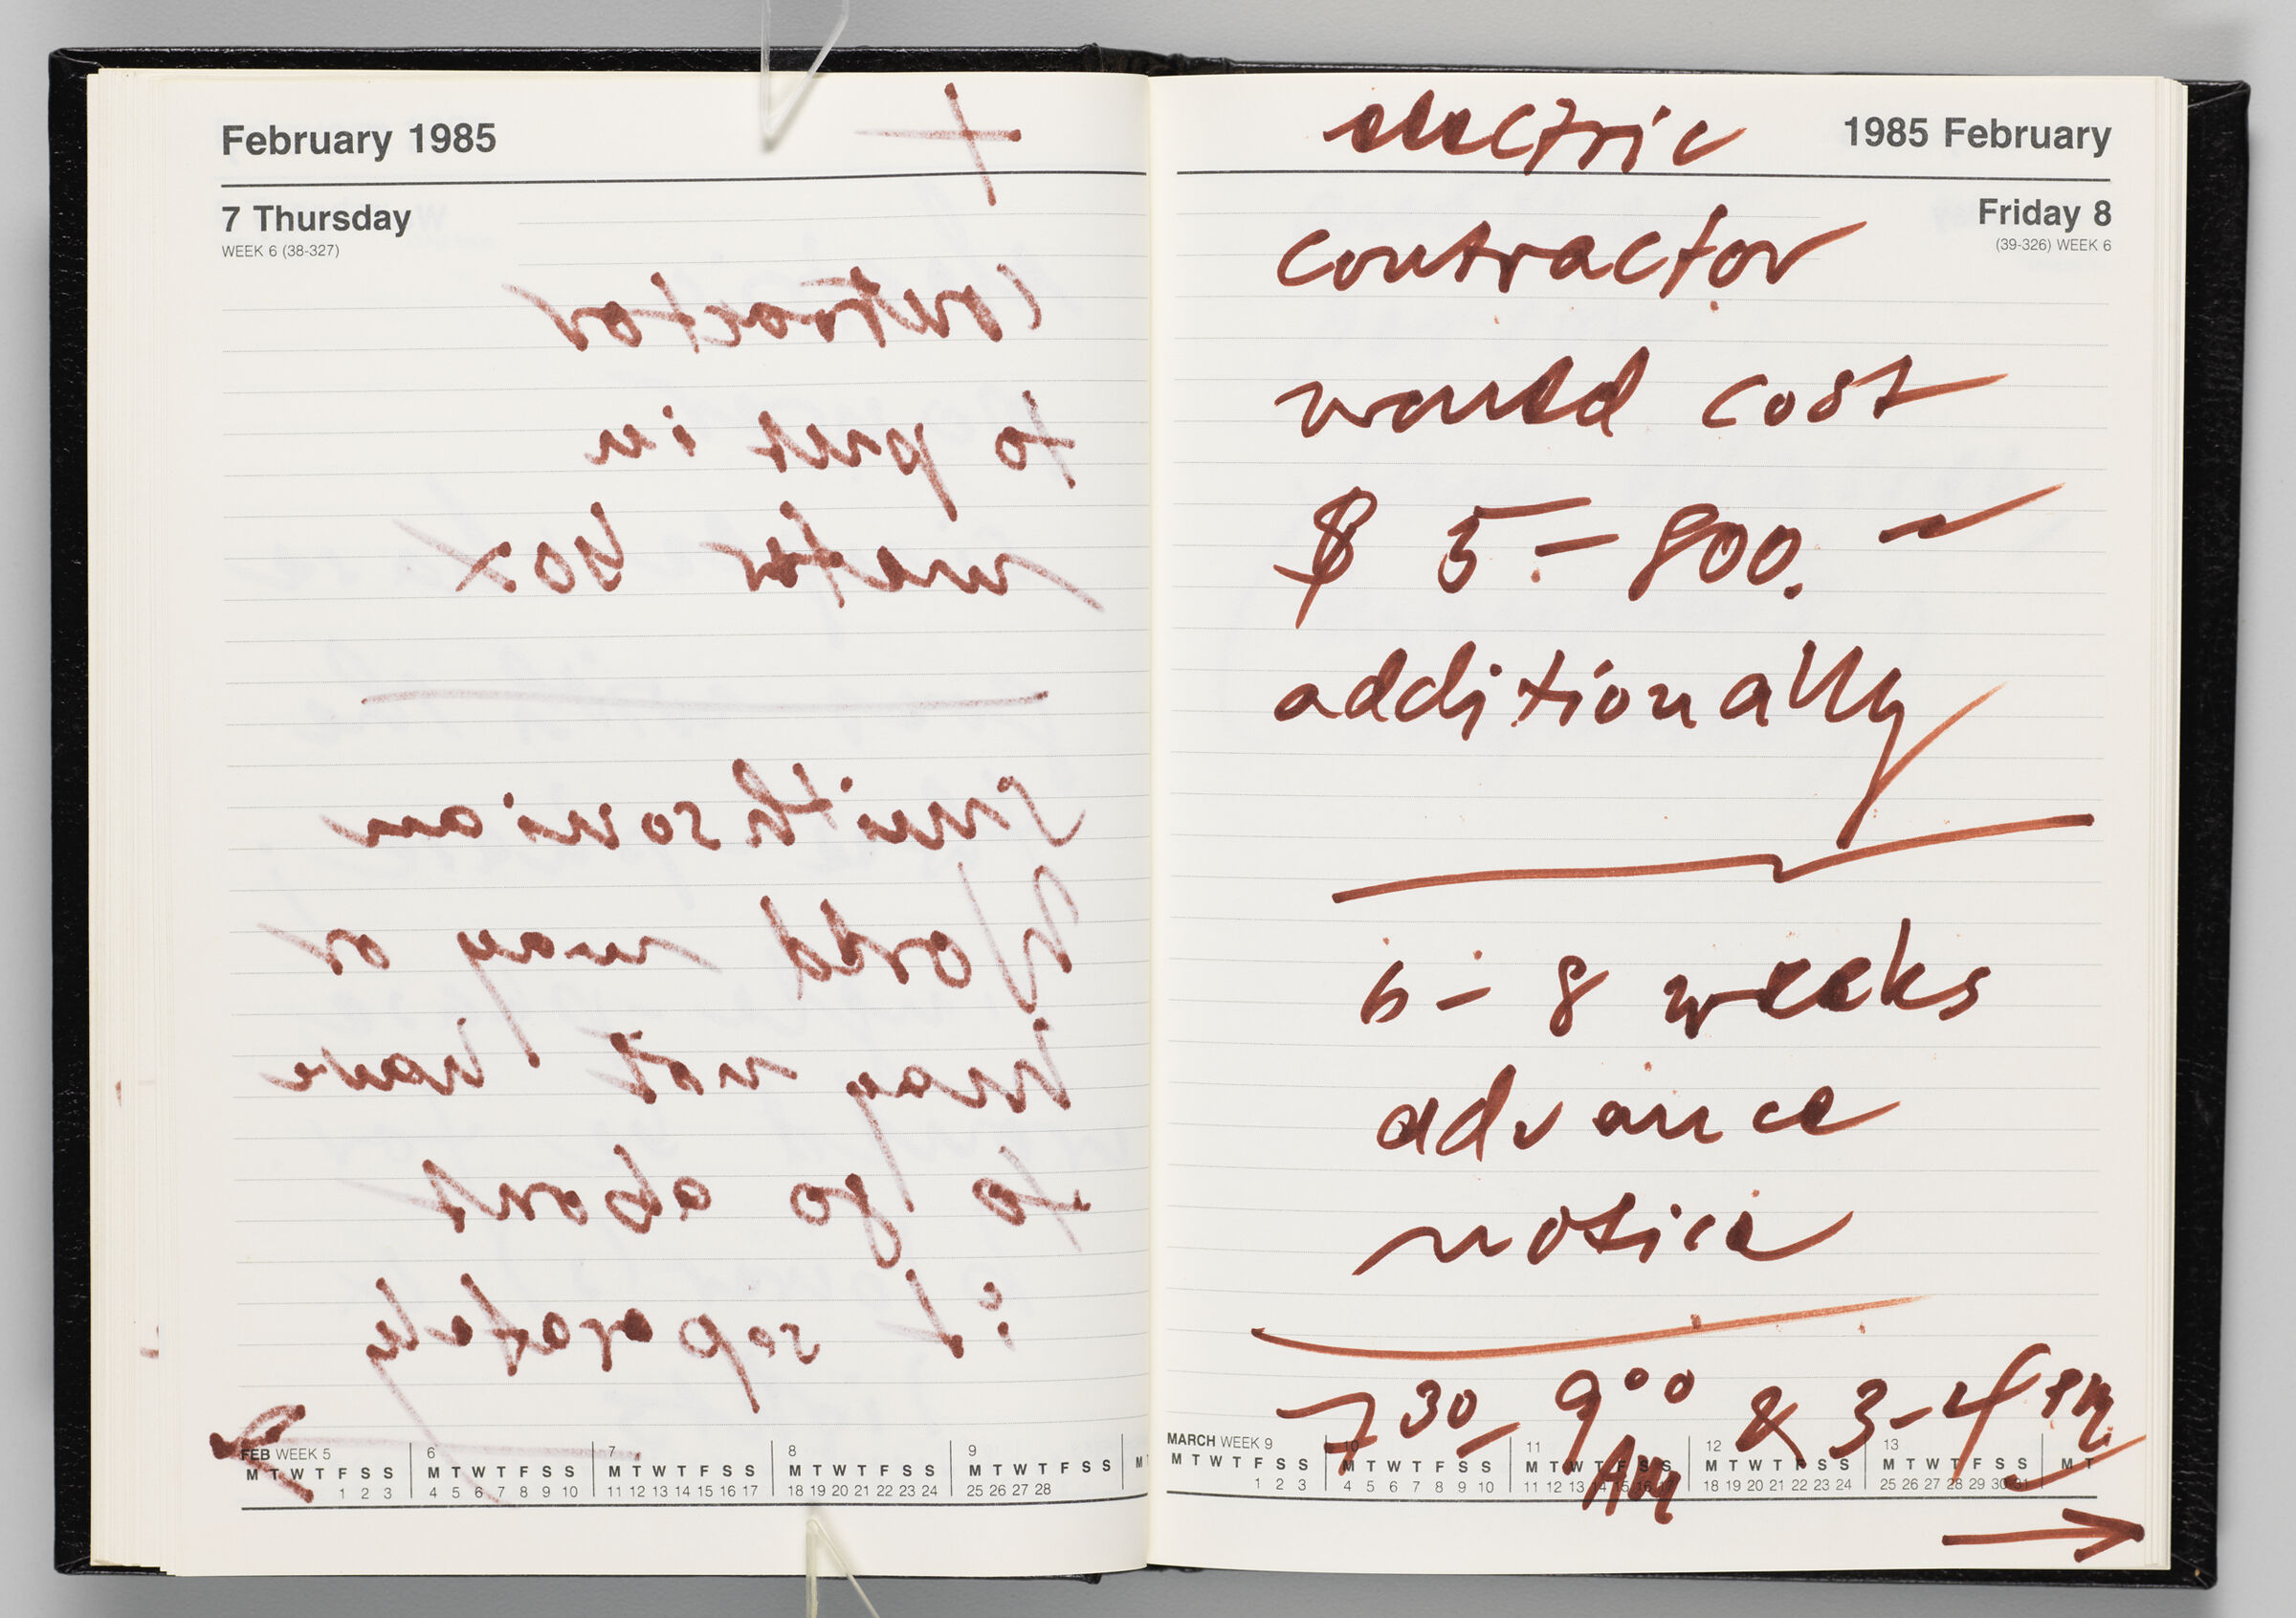 Untitled (Bleed-Through Of Previous Page, Left Page); Untitled (Notes On Calendar Page February 8, 1985, Right Page)